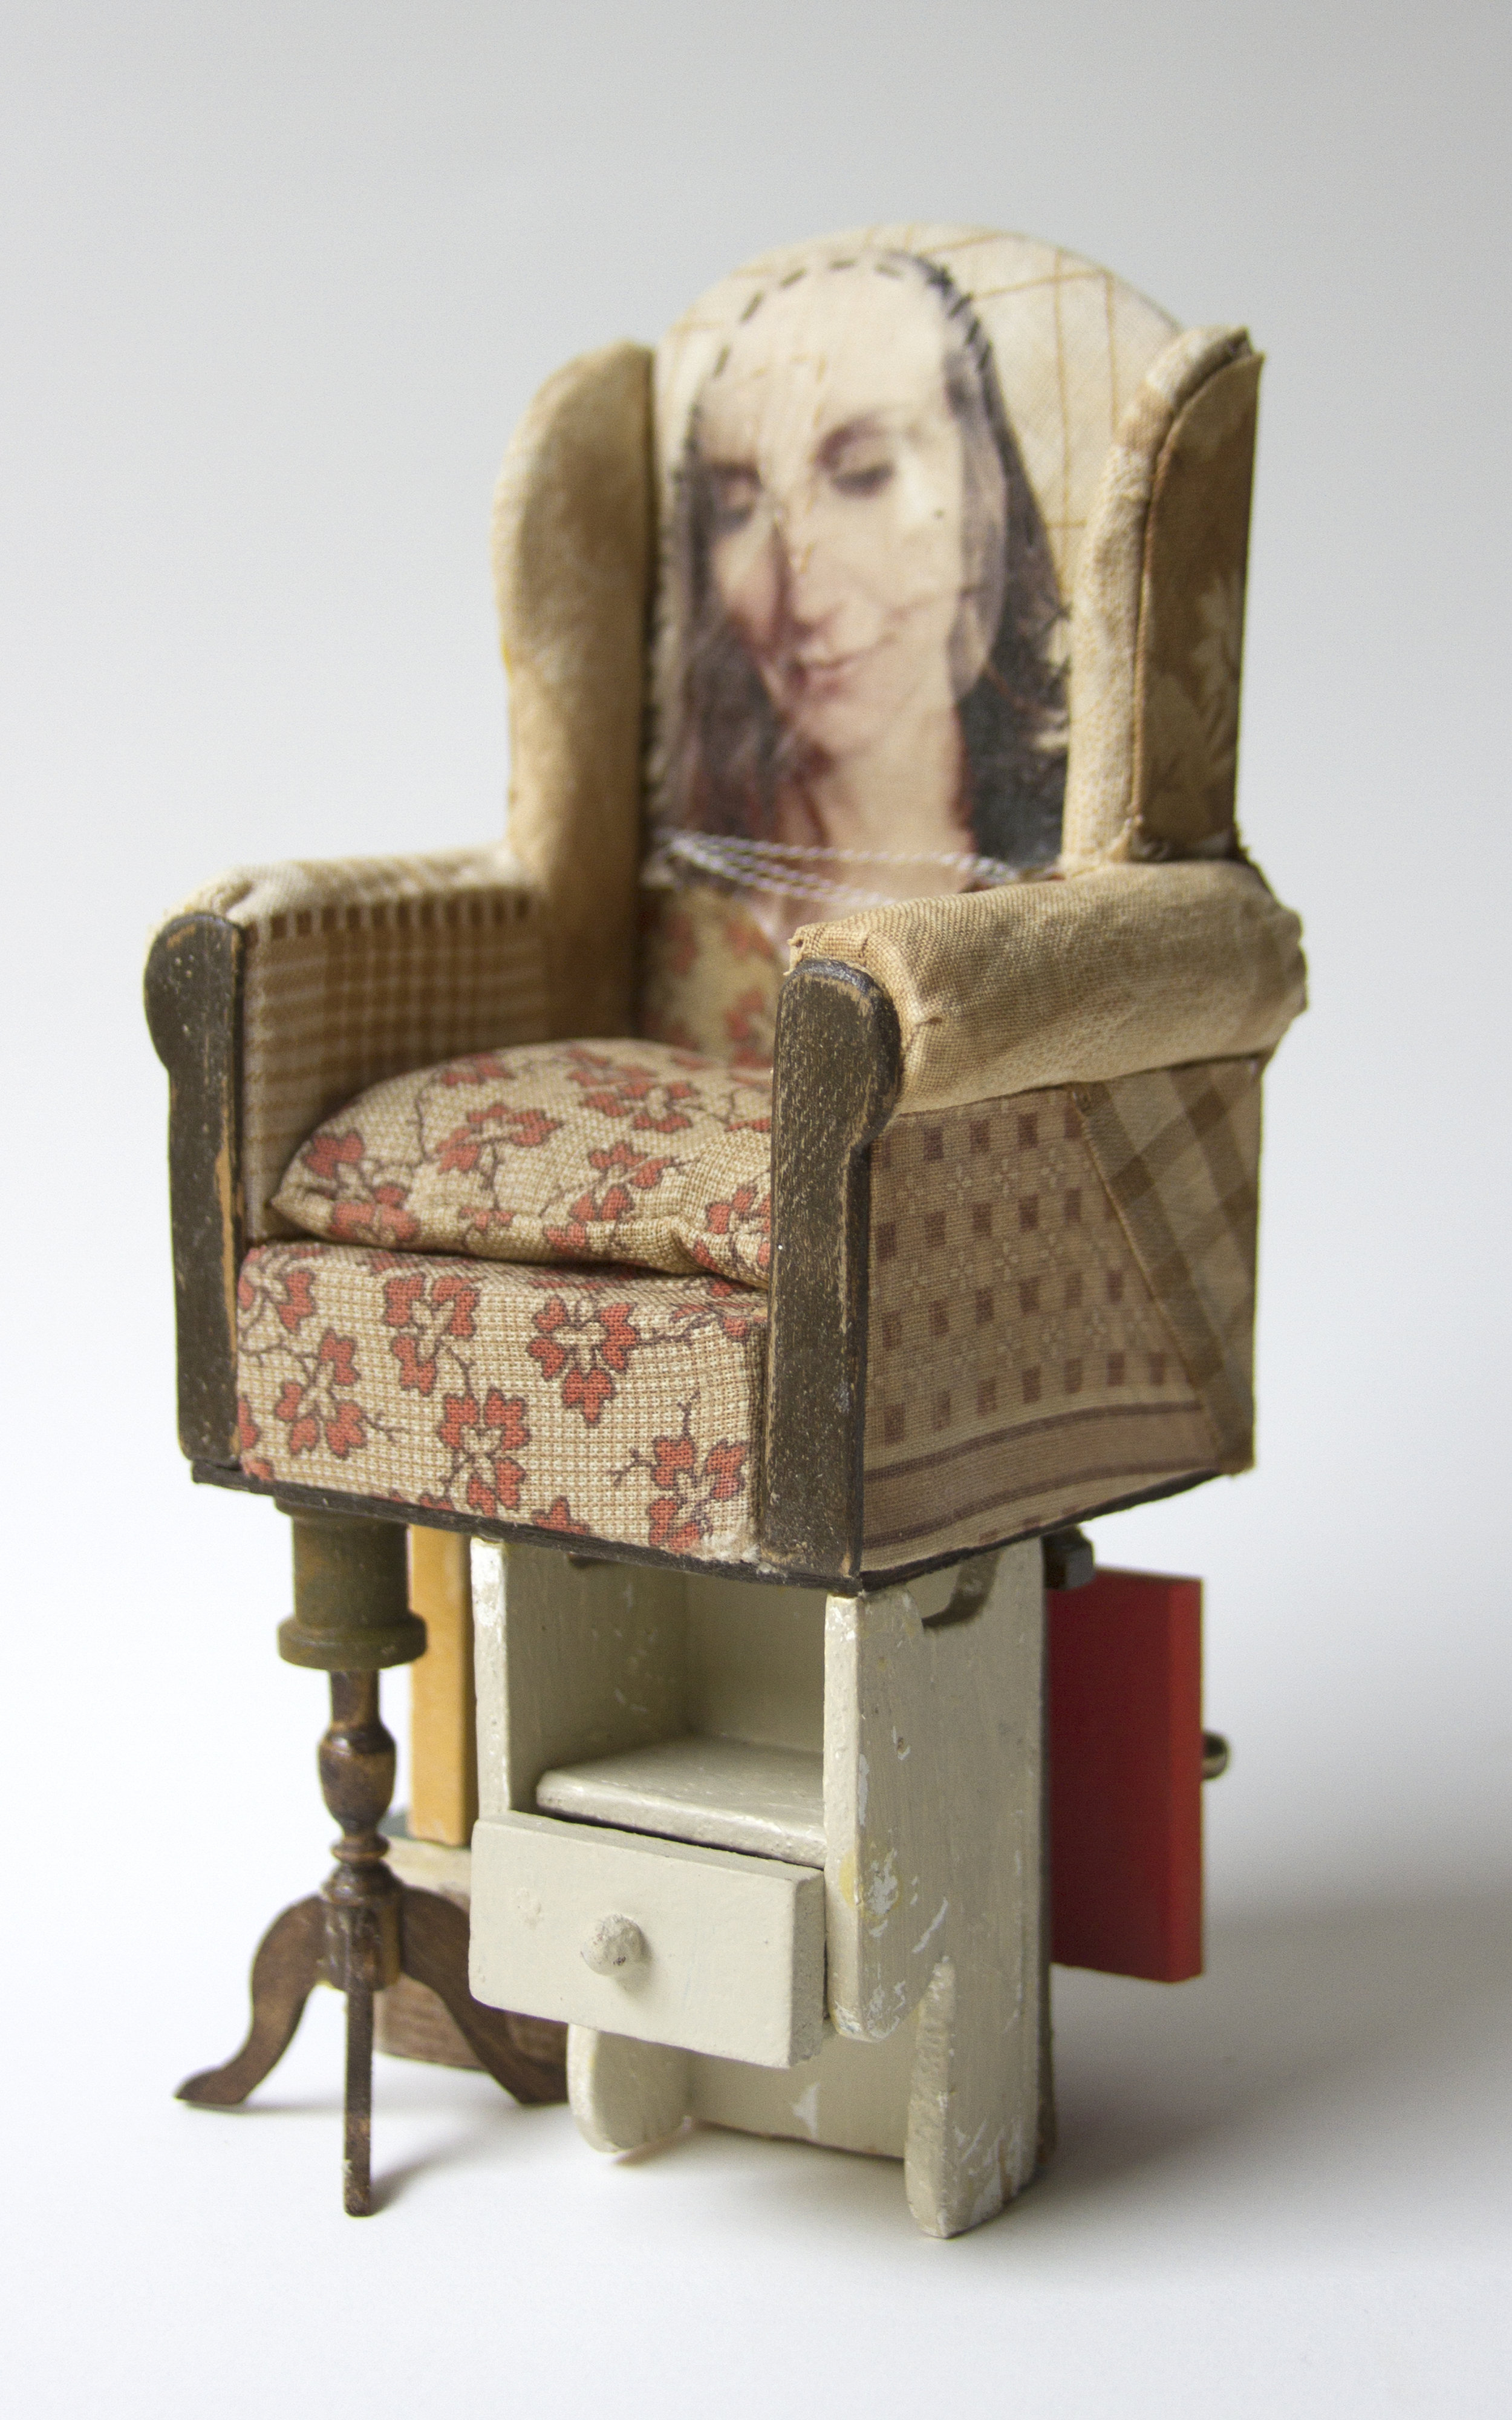  Chelsea Revelle,  “Imperial Harlequin”   Dollhouse furniture, fabric, wood, 6.5 x 3 x 2 inches 